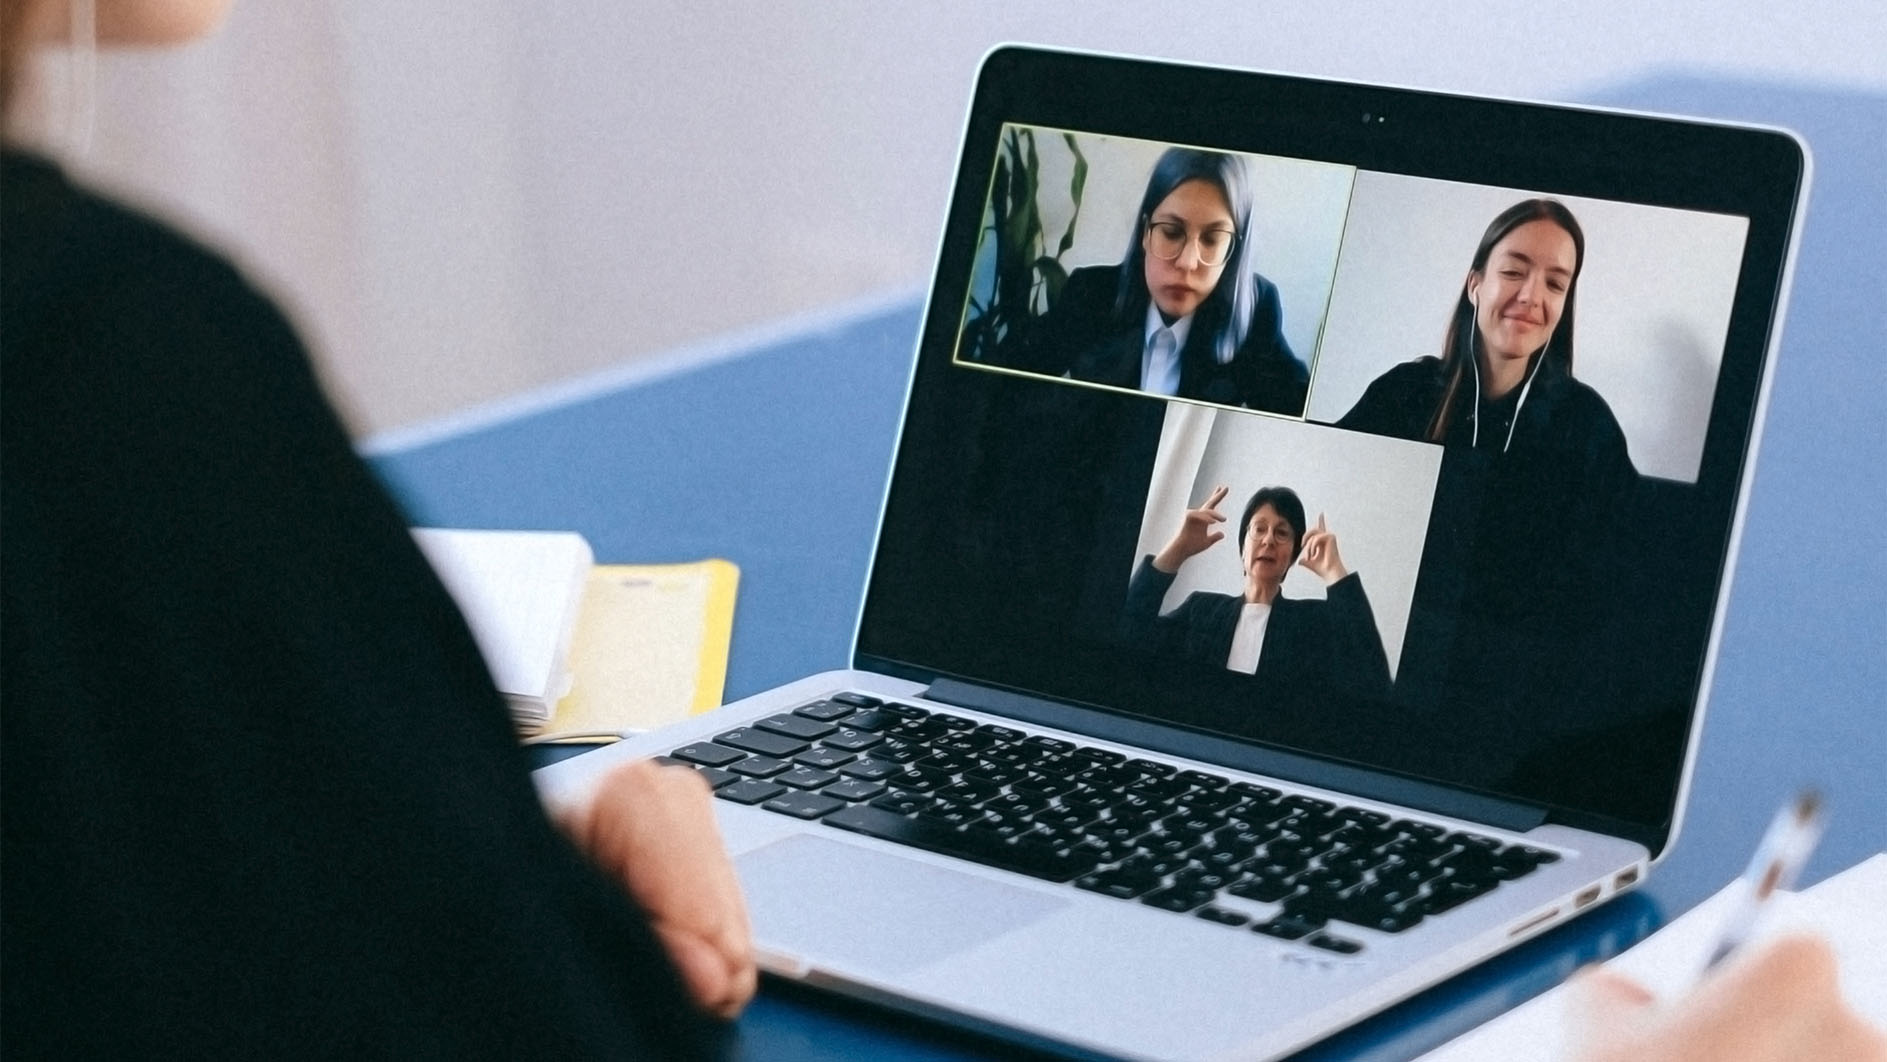 person on webcasting video conferencing call with coworkers